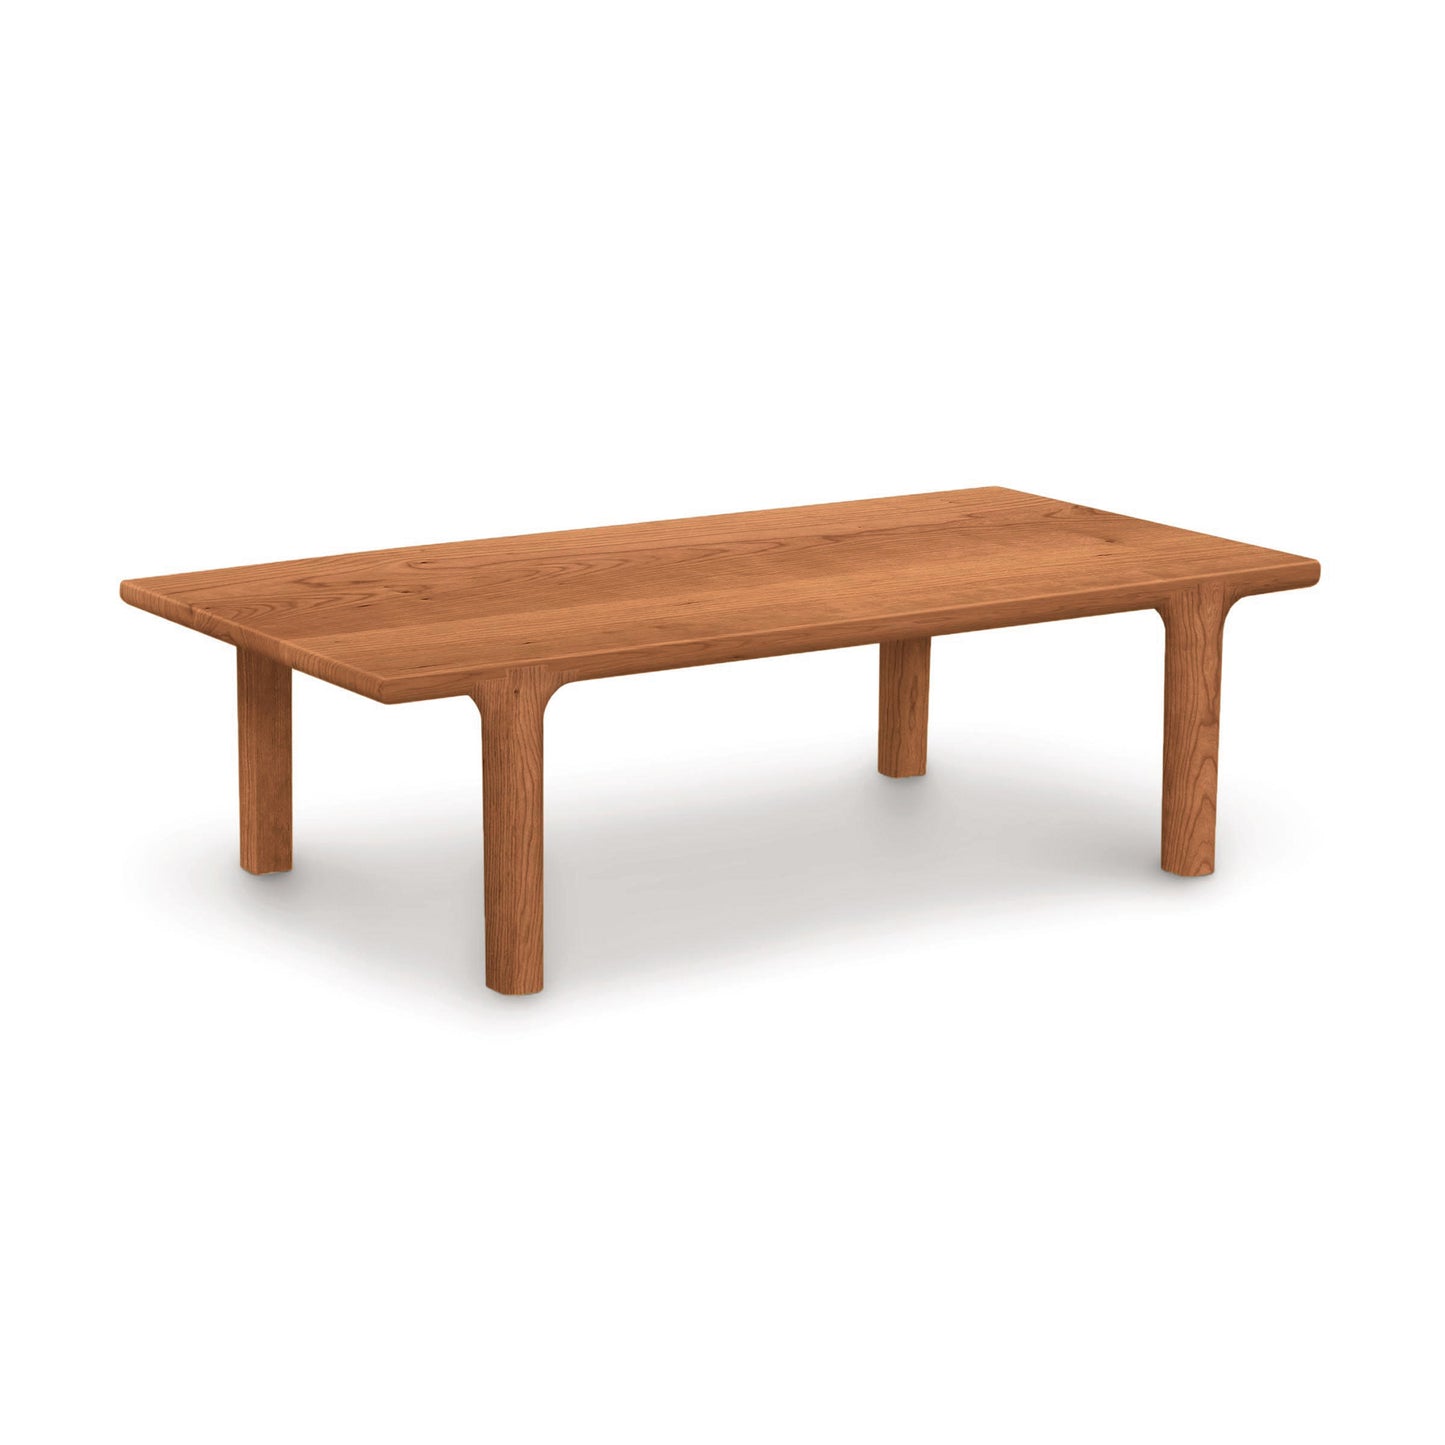 A Sierra Rectangular Coffee Table by Copeland Furniture on a white background with wood finishes.